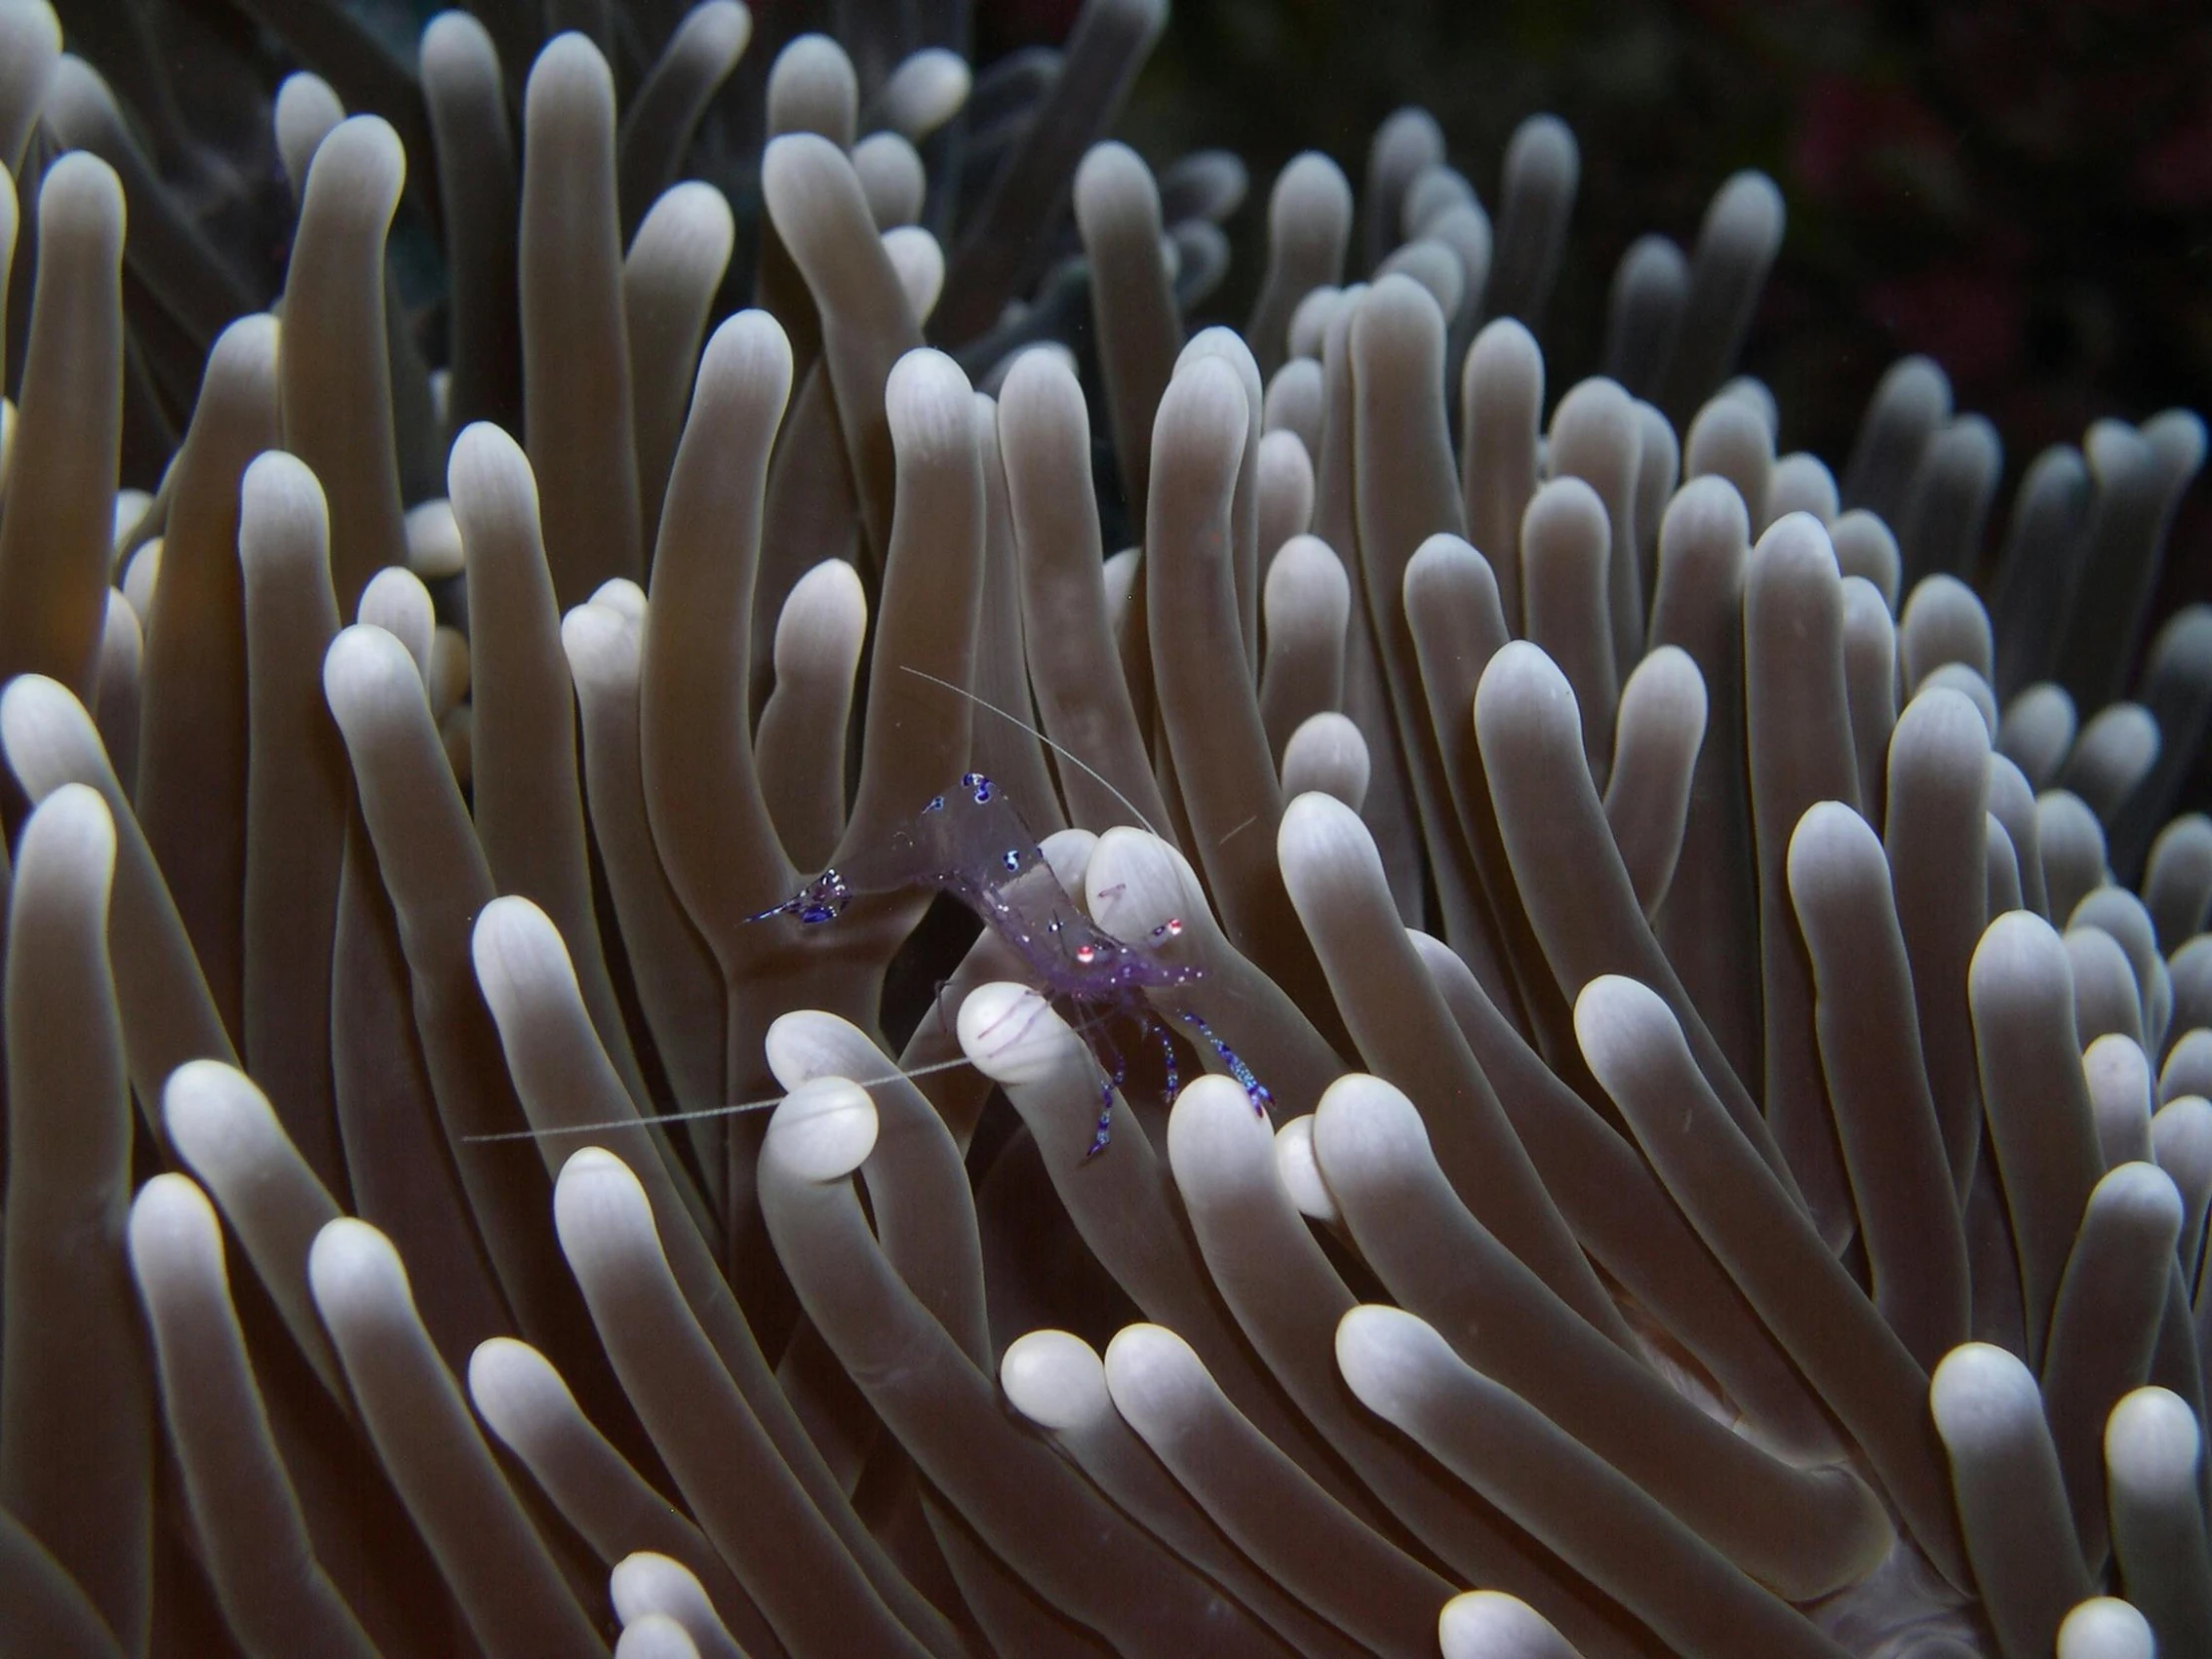 a close up of a sea anemone on a coral, by Gwen Barnard, unsplash contest winner, ghost shrimp, white and purple, underwater with coral and fish, ignant